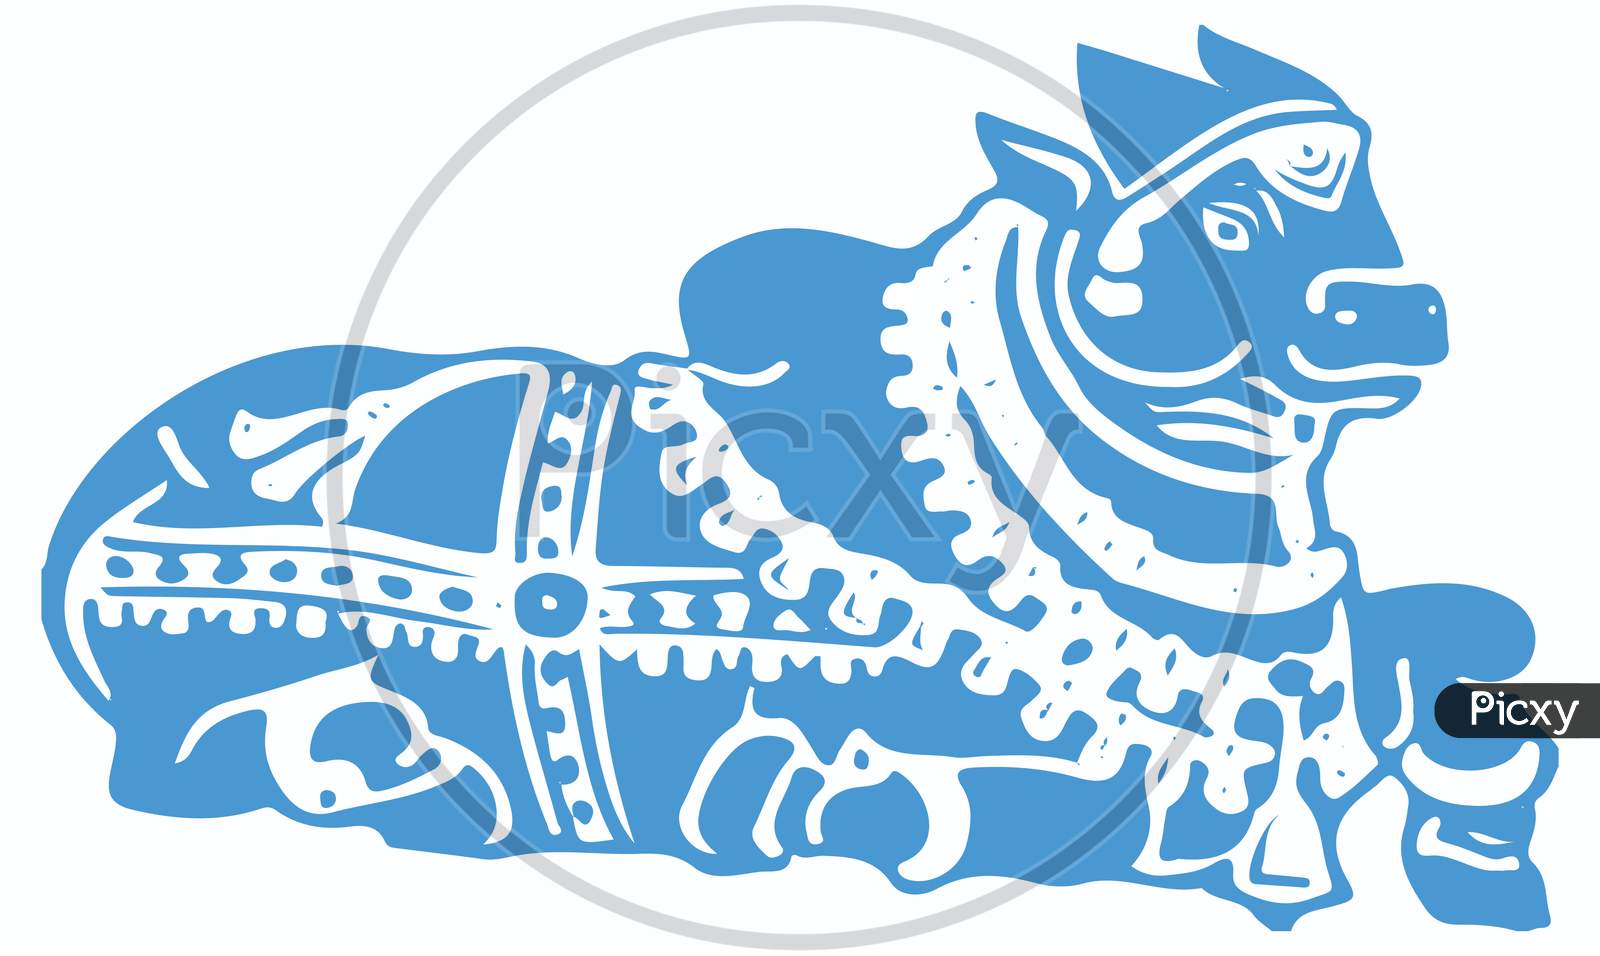 Sketch Of Lord Basava Or Nandi Outline Editable Vector Illustration. Vehicle Of Lord Shiva